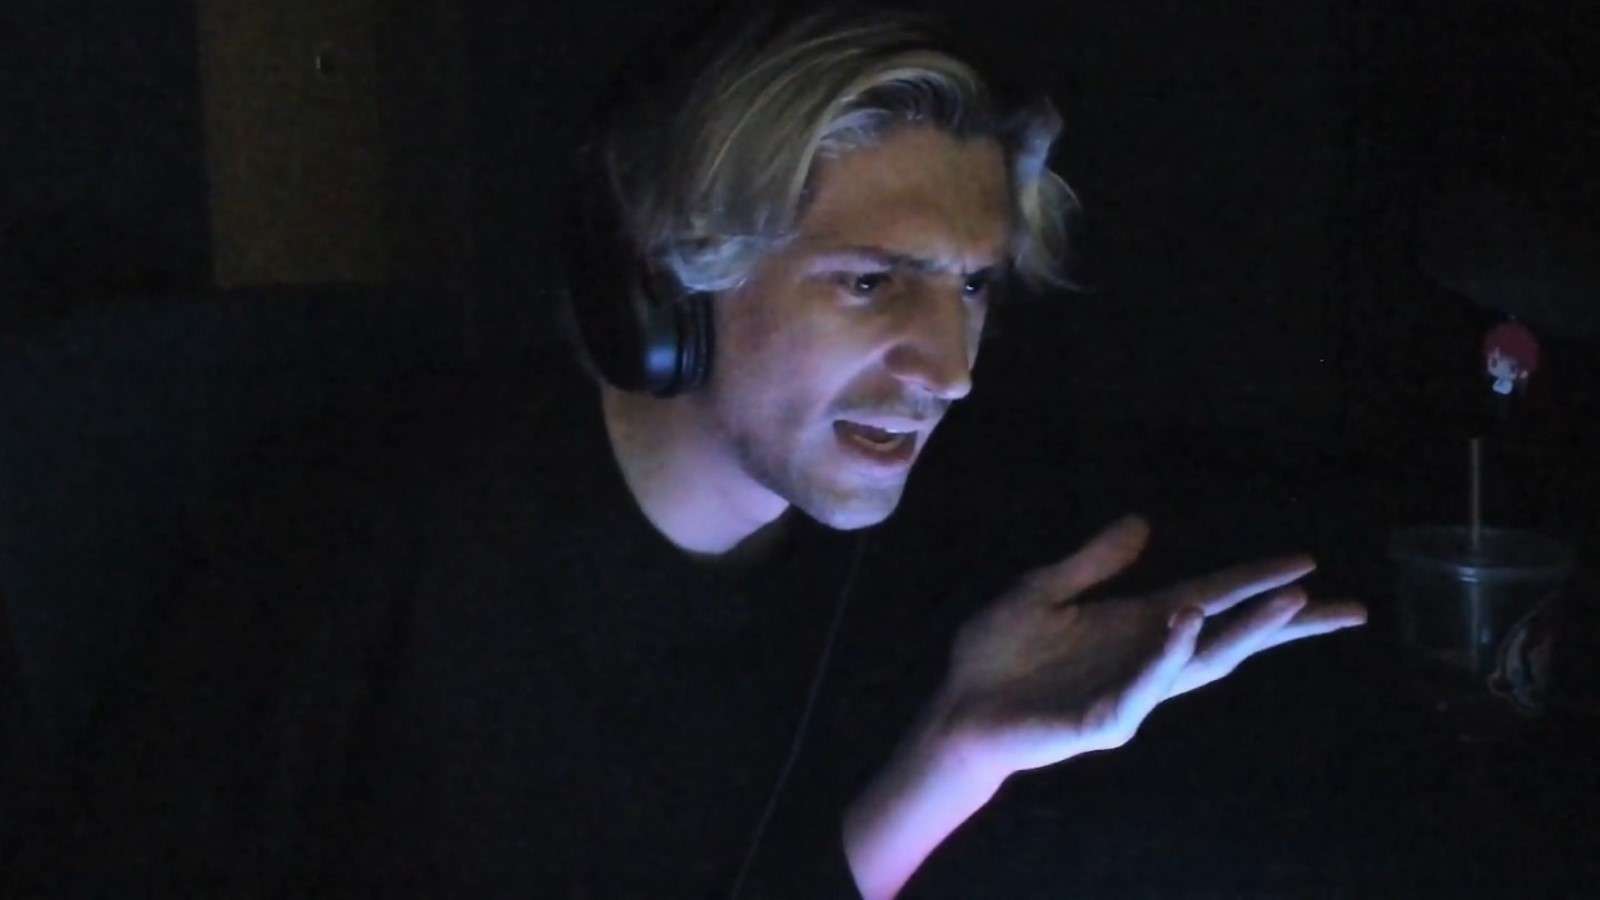 xQc claims he'll have to set up a hidden bunker